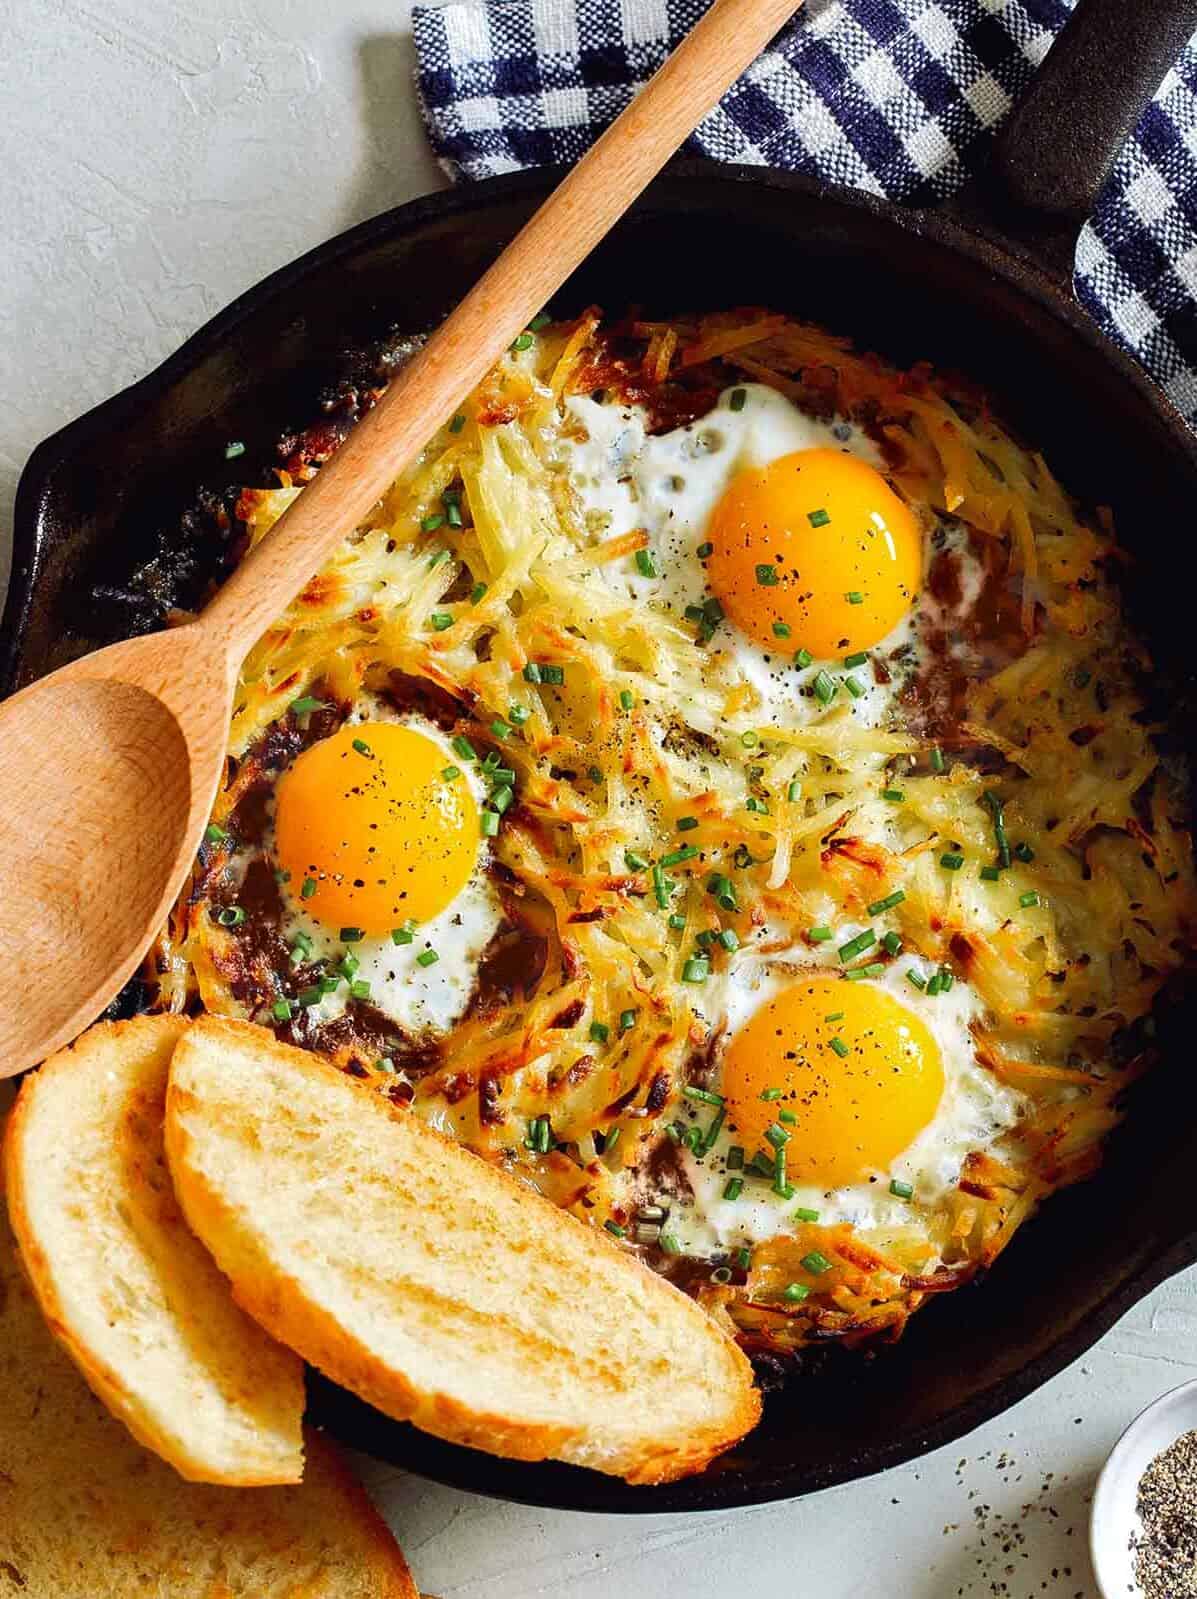 Simple cheesy skillet hash browns and eggs with bread and a wooden spoon.